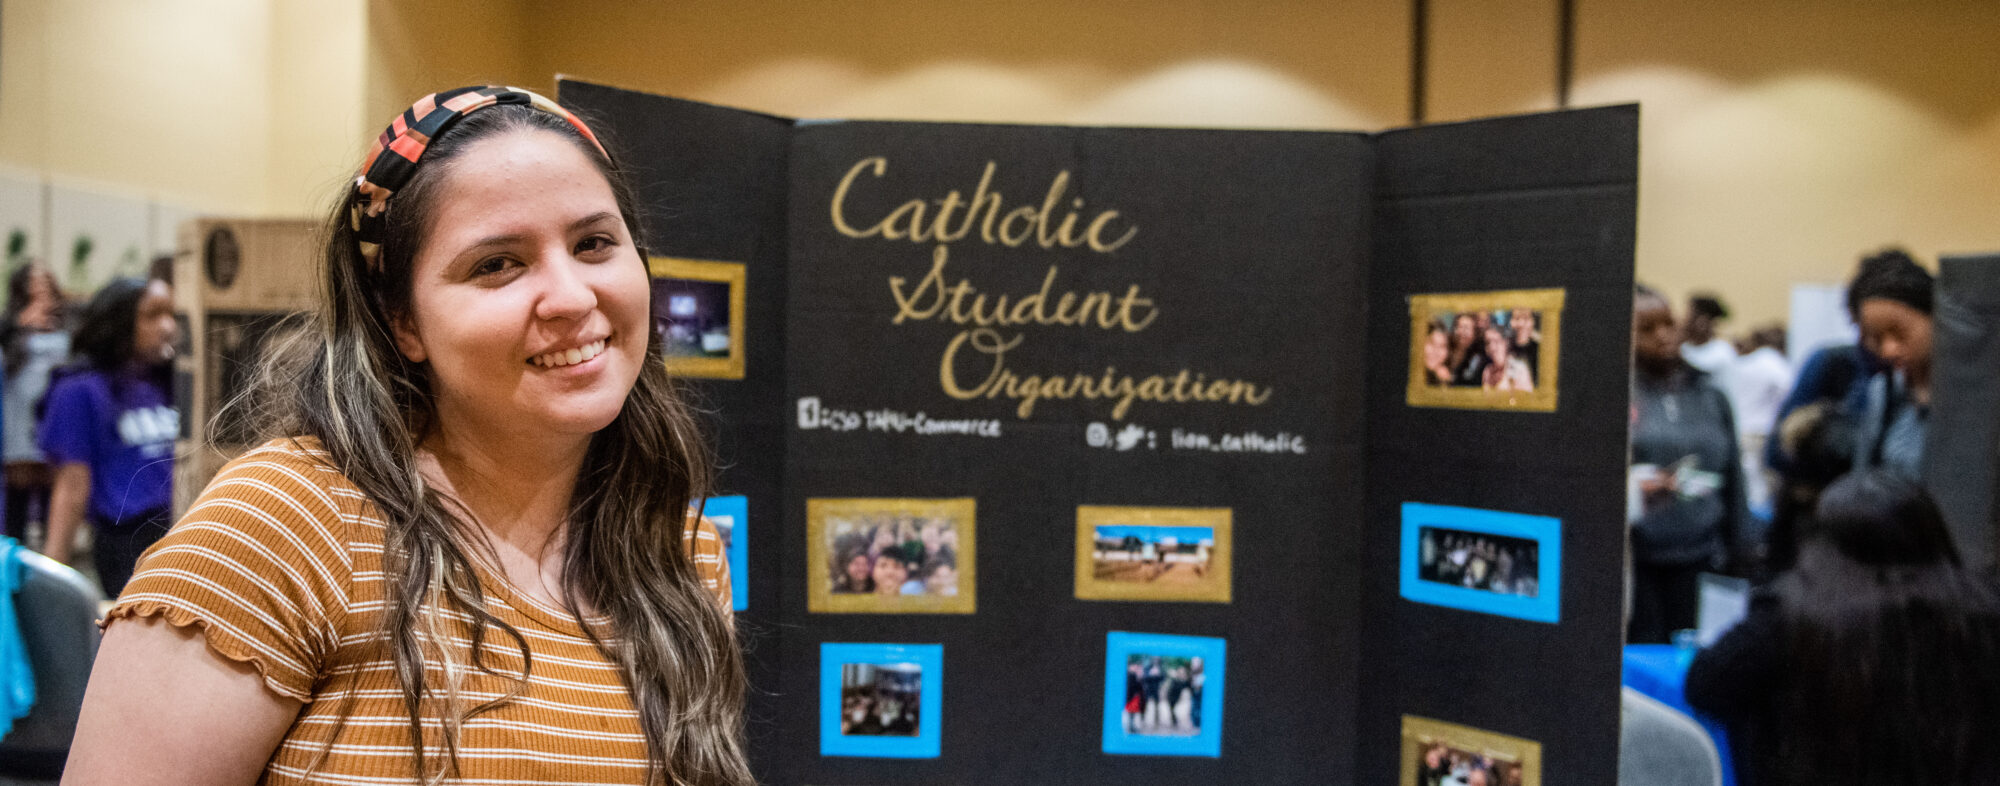 Student smiling with behind a poster with photos of the Catholic Student Organization.